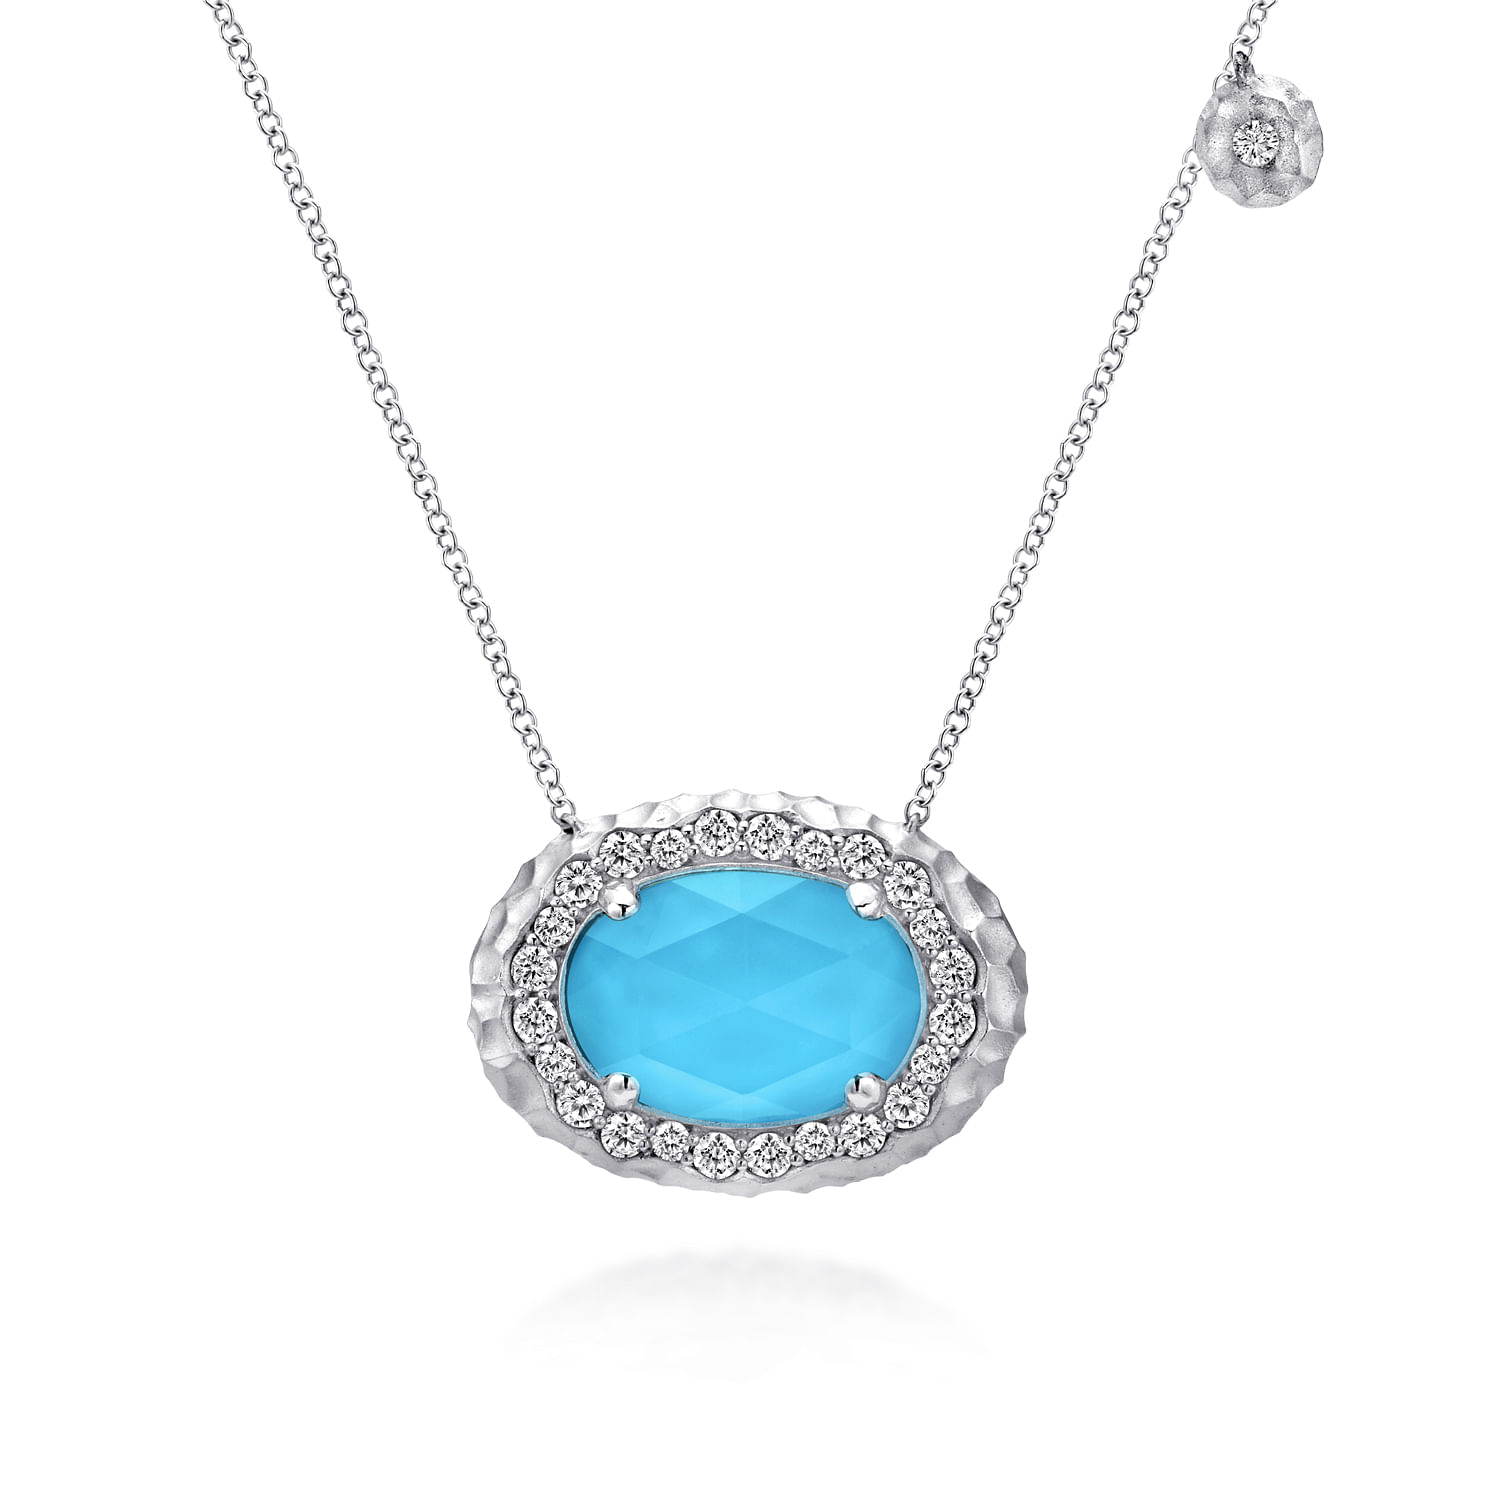 Sterling Silver Rock Crystal/Turquoise Necklace with White Sapphire Halo